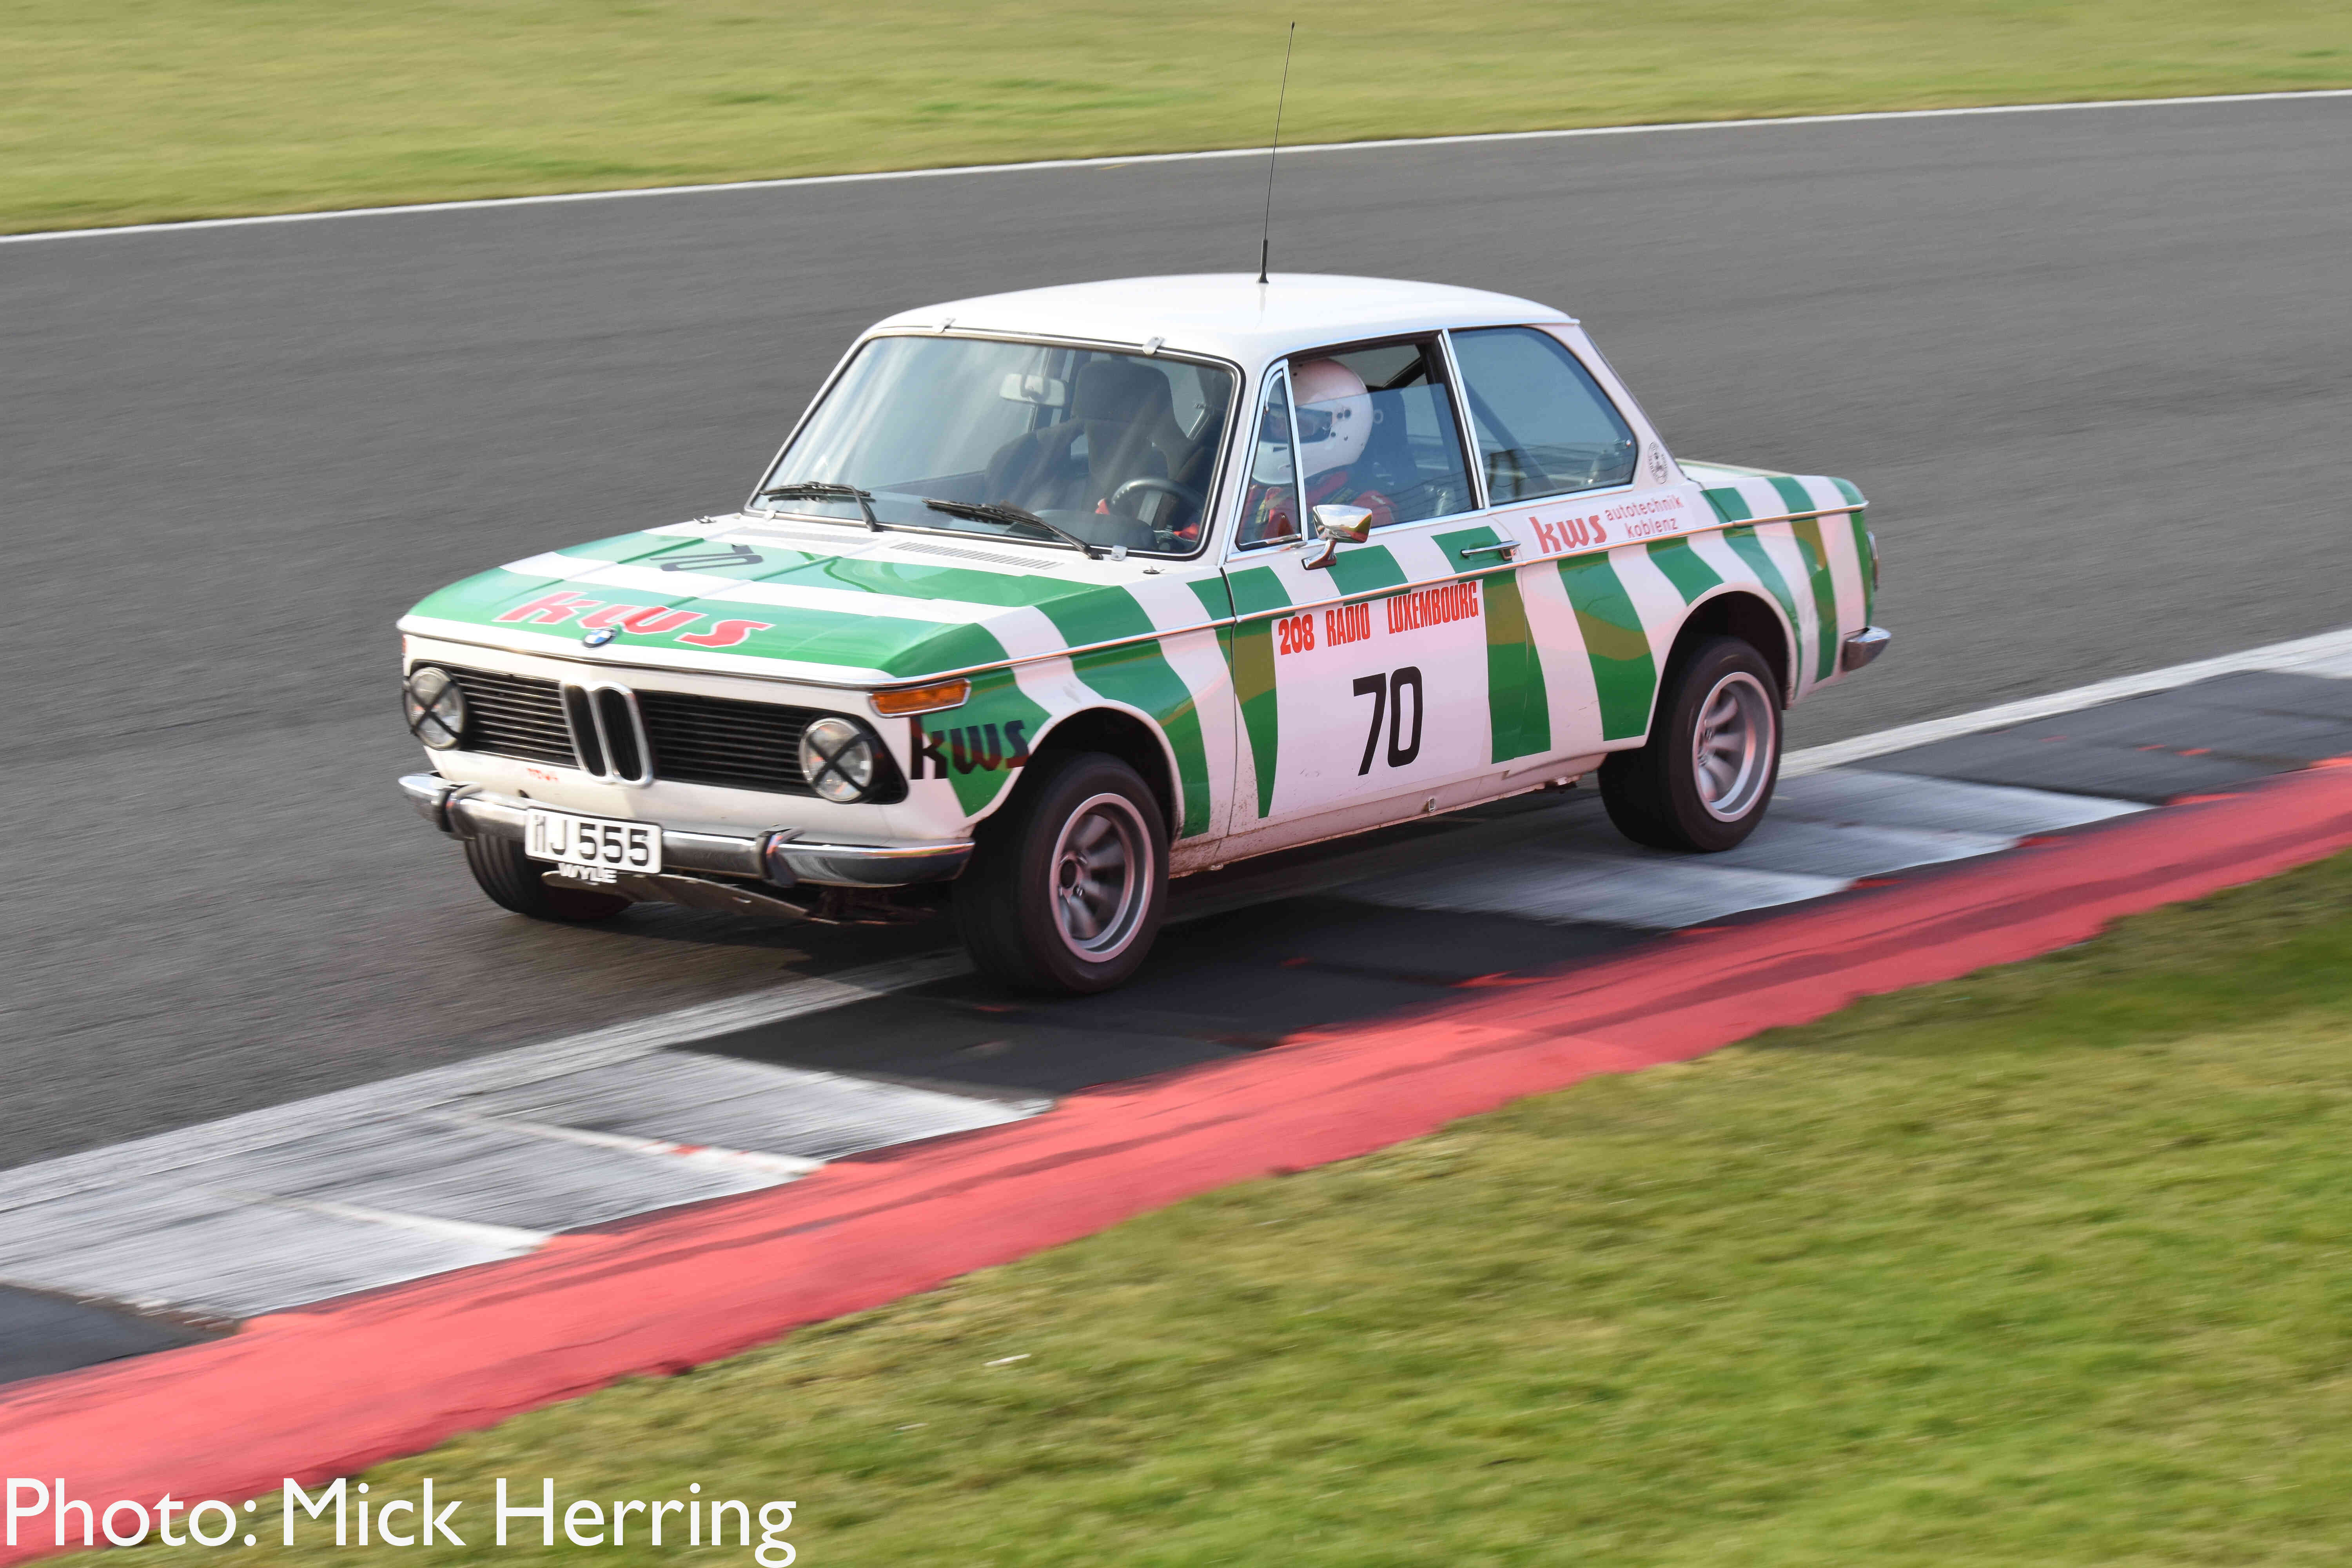 Original Works Rally BMW 2002 triumphs at VSCC Pomeroy Trophy cover